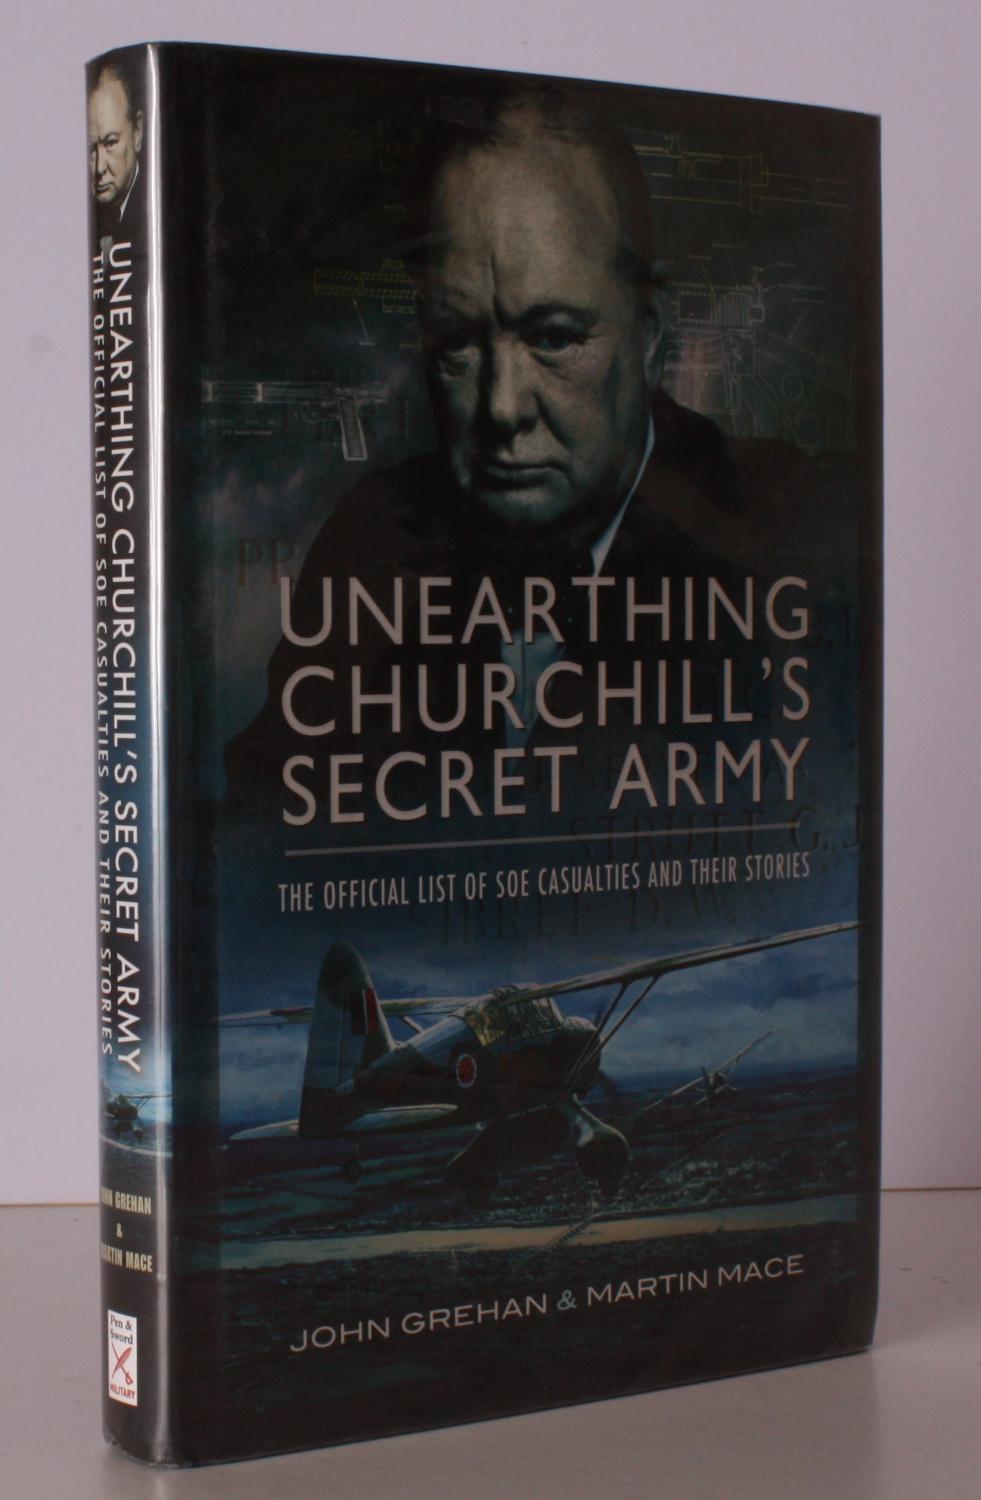 Unearthing Churchill #39 s Secret Army The Official List of SOE Casualties